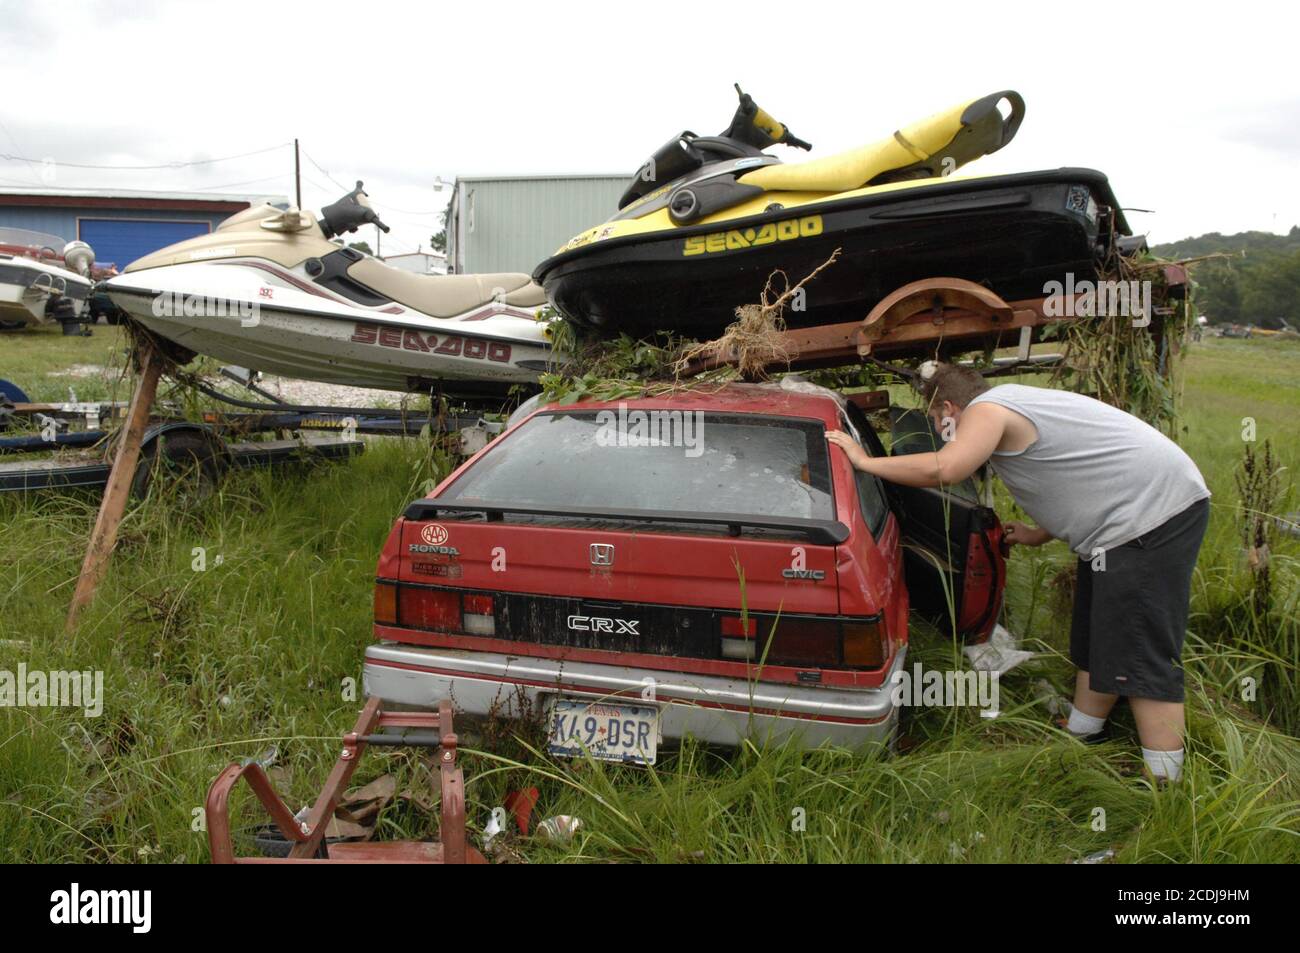 Marble Falls, TX  June 27, 2007: Owner Andrew Bruseau inspects his flooded car after up to 19 inches of rain in a few hours fell on the Marble Falls area, resulting in property damage in the millions as creeks overflowed an industrial area. No deaths were reported.        ©Bob Daemmrich Stock Photo